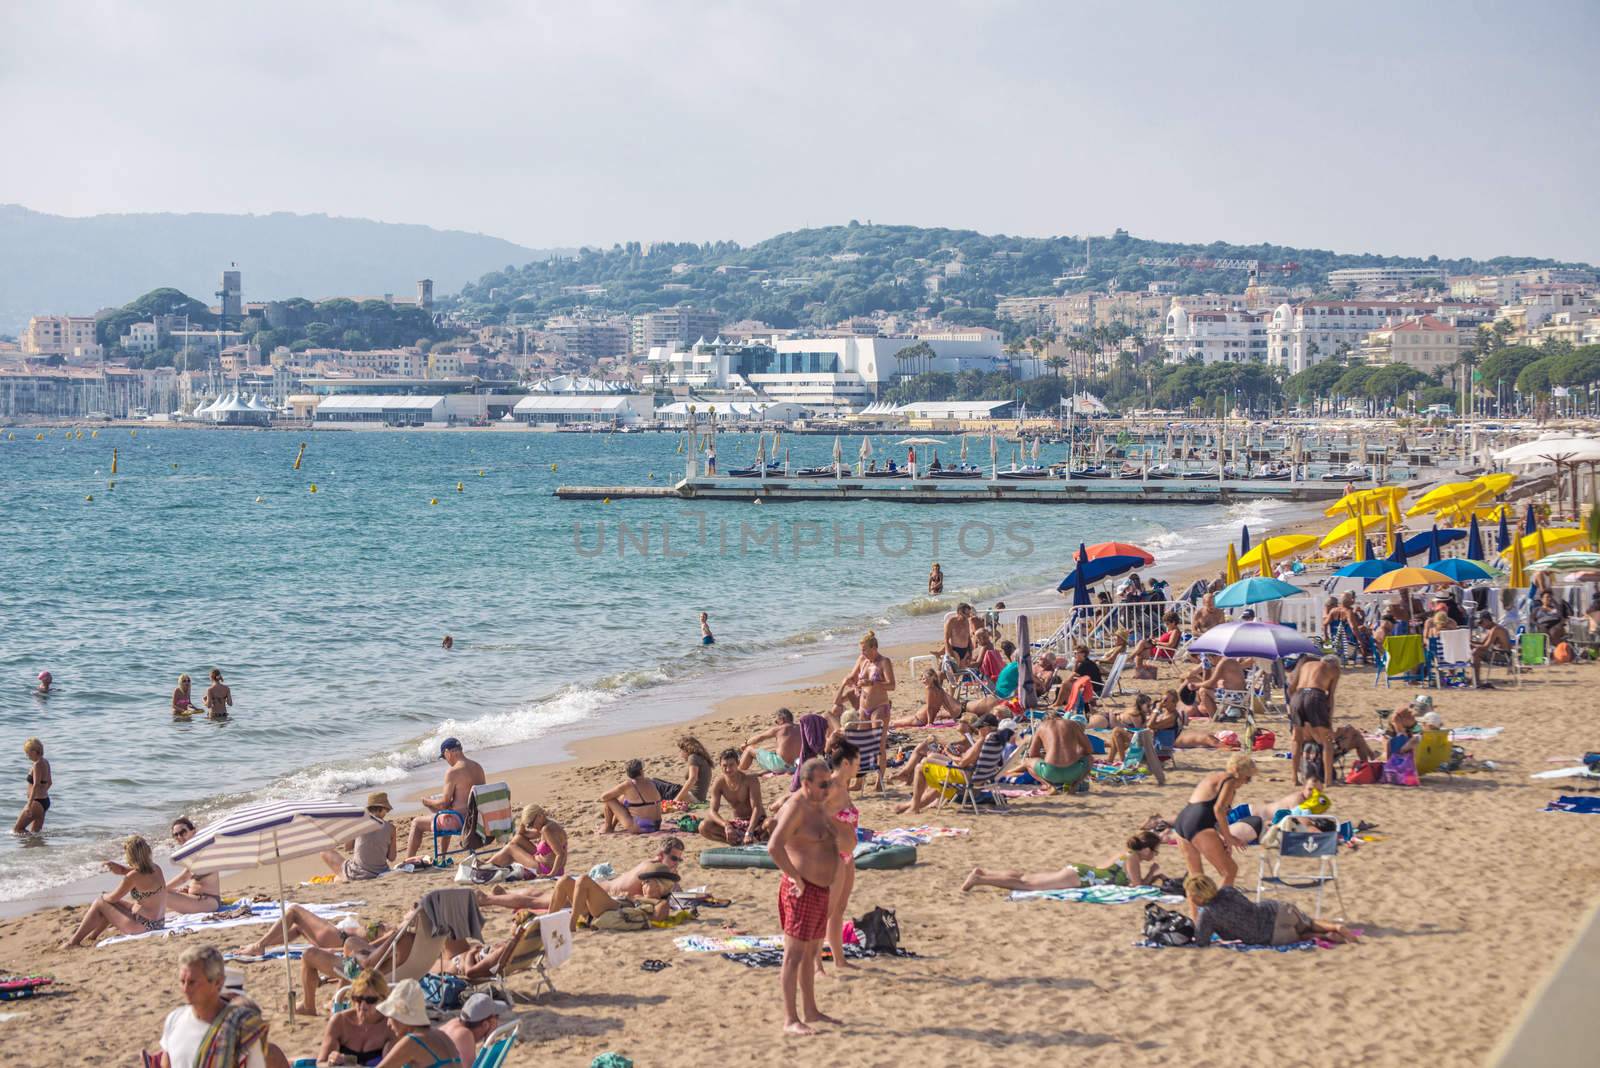 Cannes, France - September 27, 2013: People on the beach in Cannes.  The famous beach on the Croisette, known for its cinema festival. People are sun bathing, swiming and resting 8 mounth in the year.